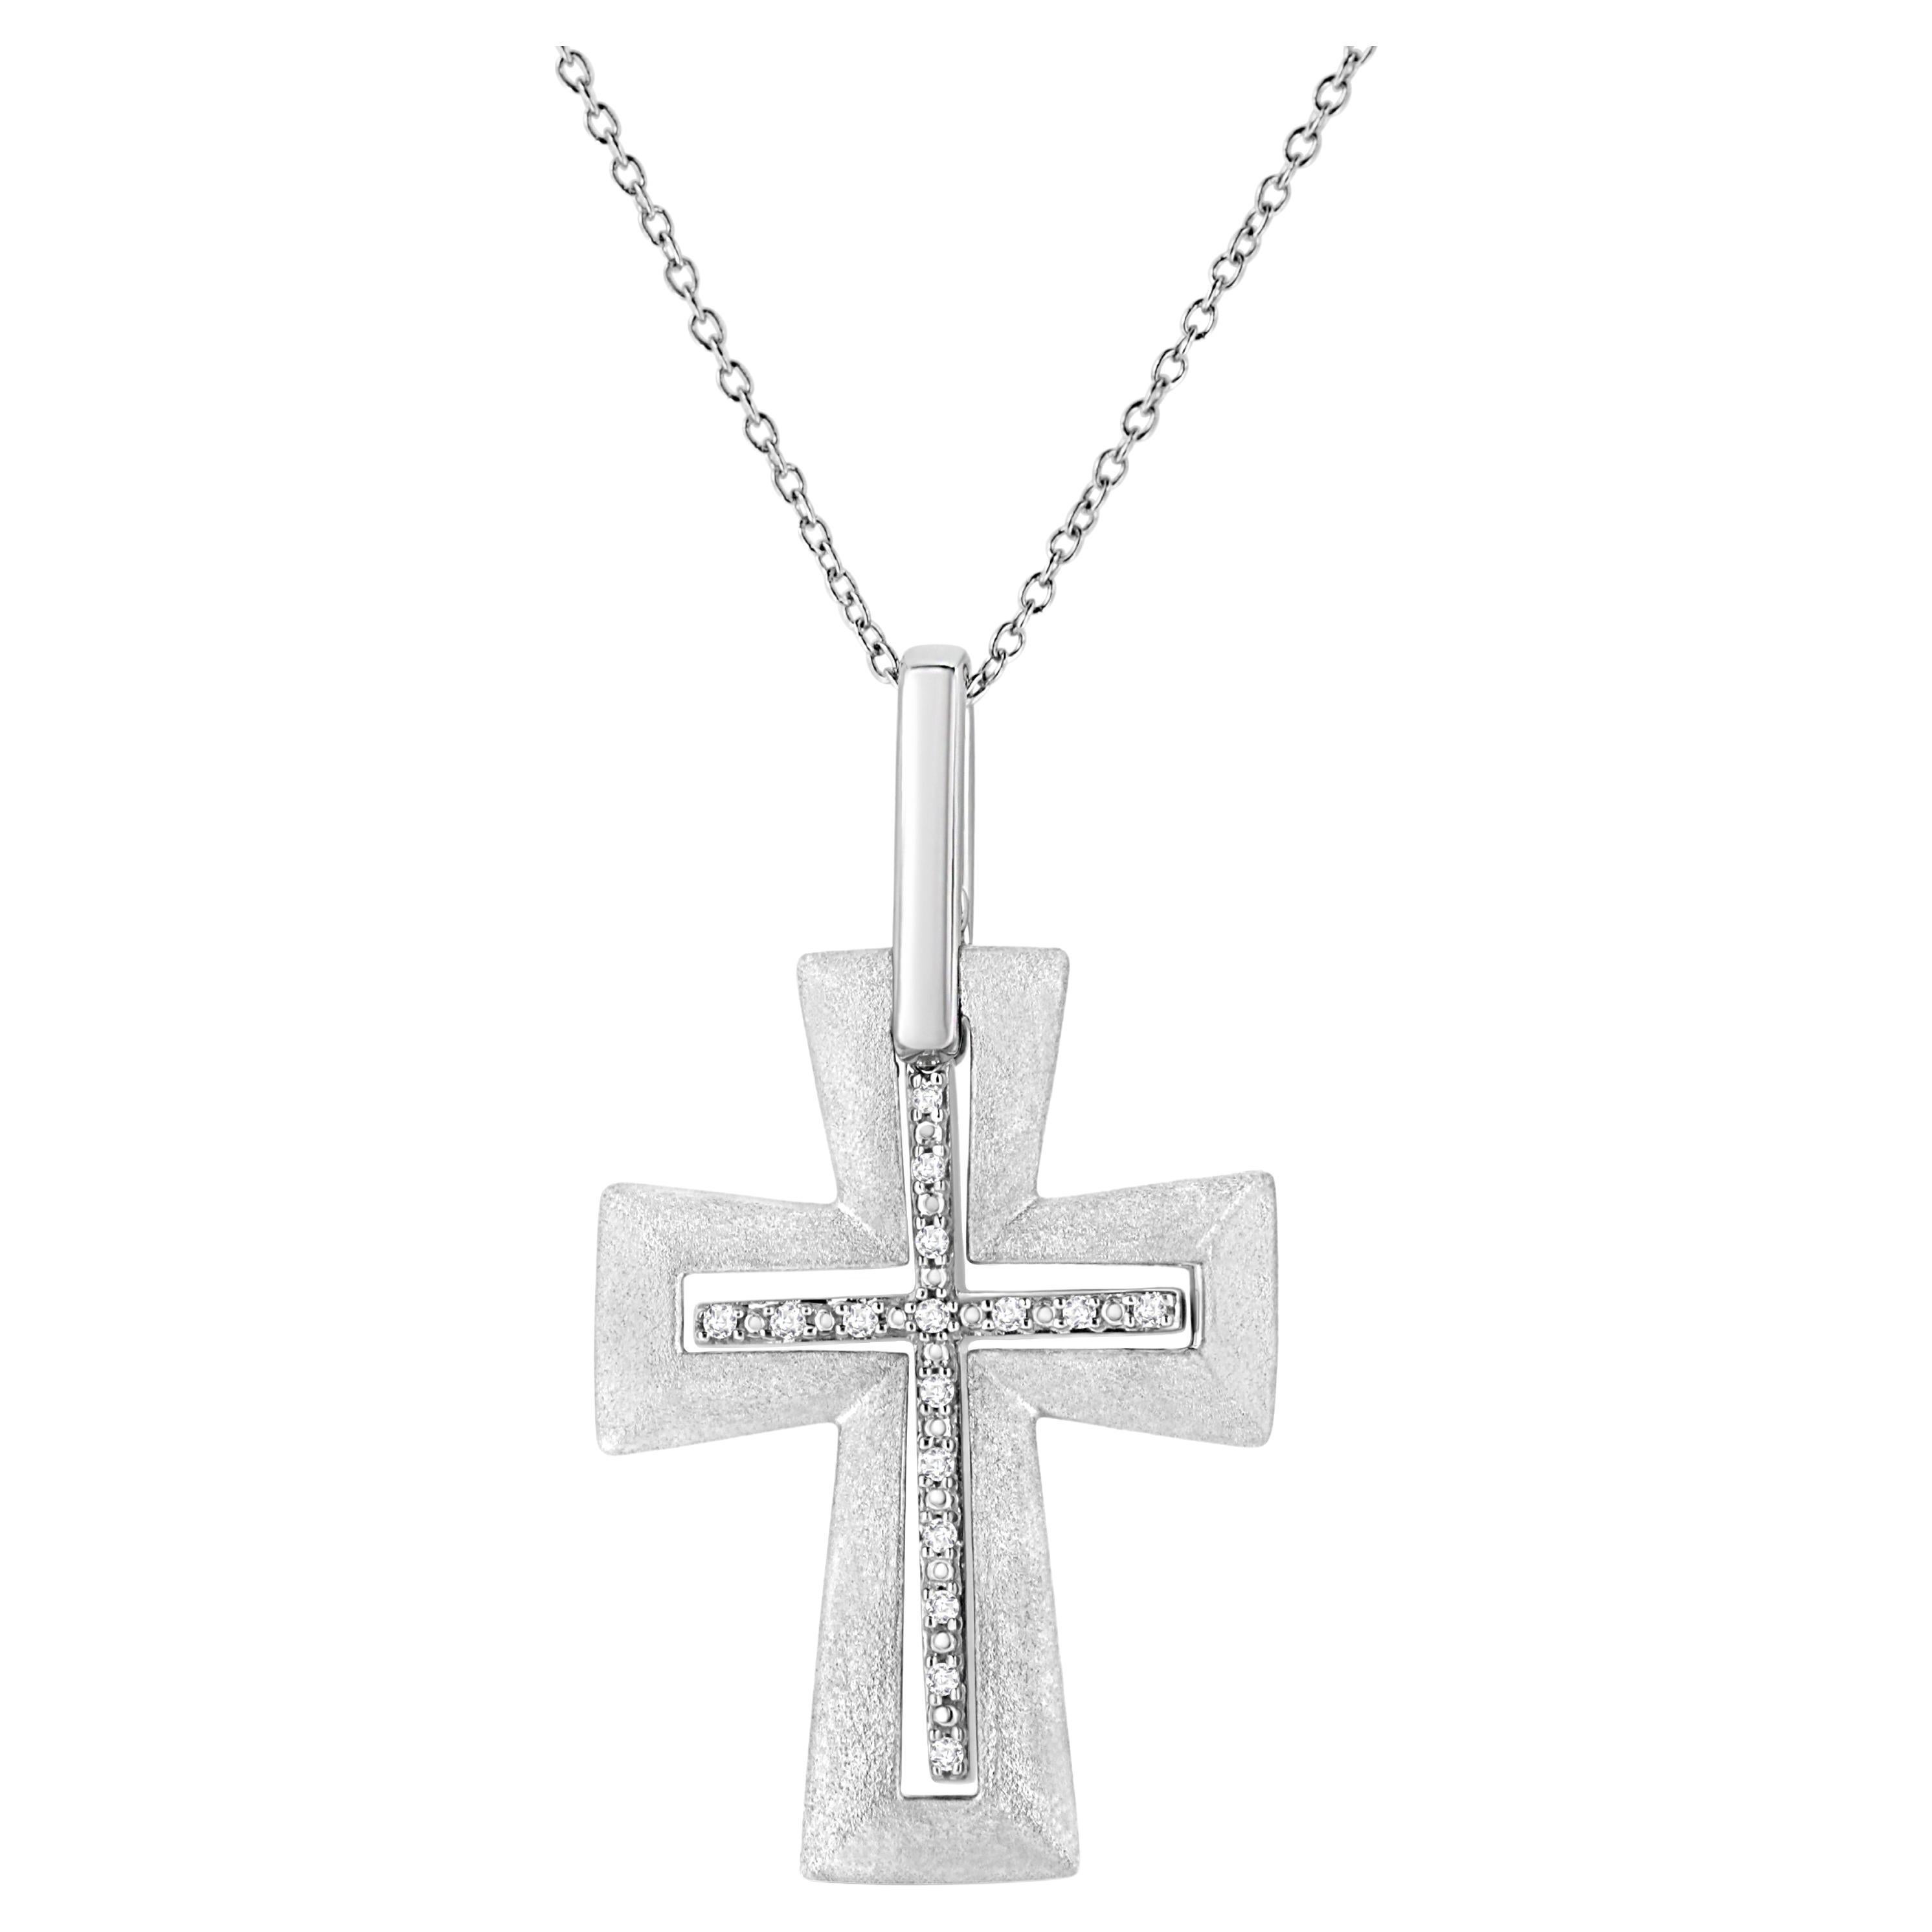 .925 Sterling Silver Prong-Set Diamond Accent Cross Pendant Necklace